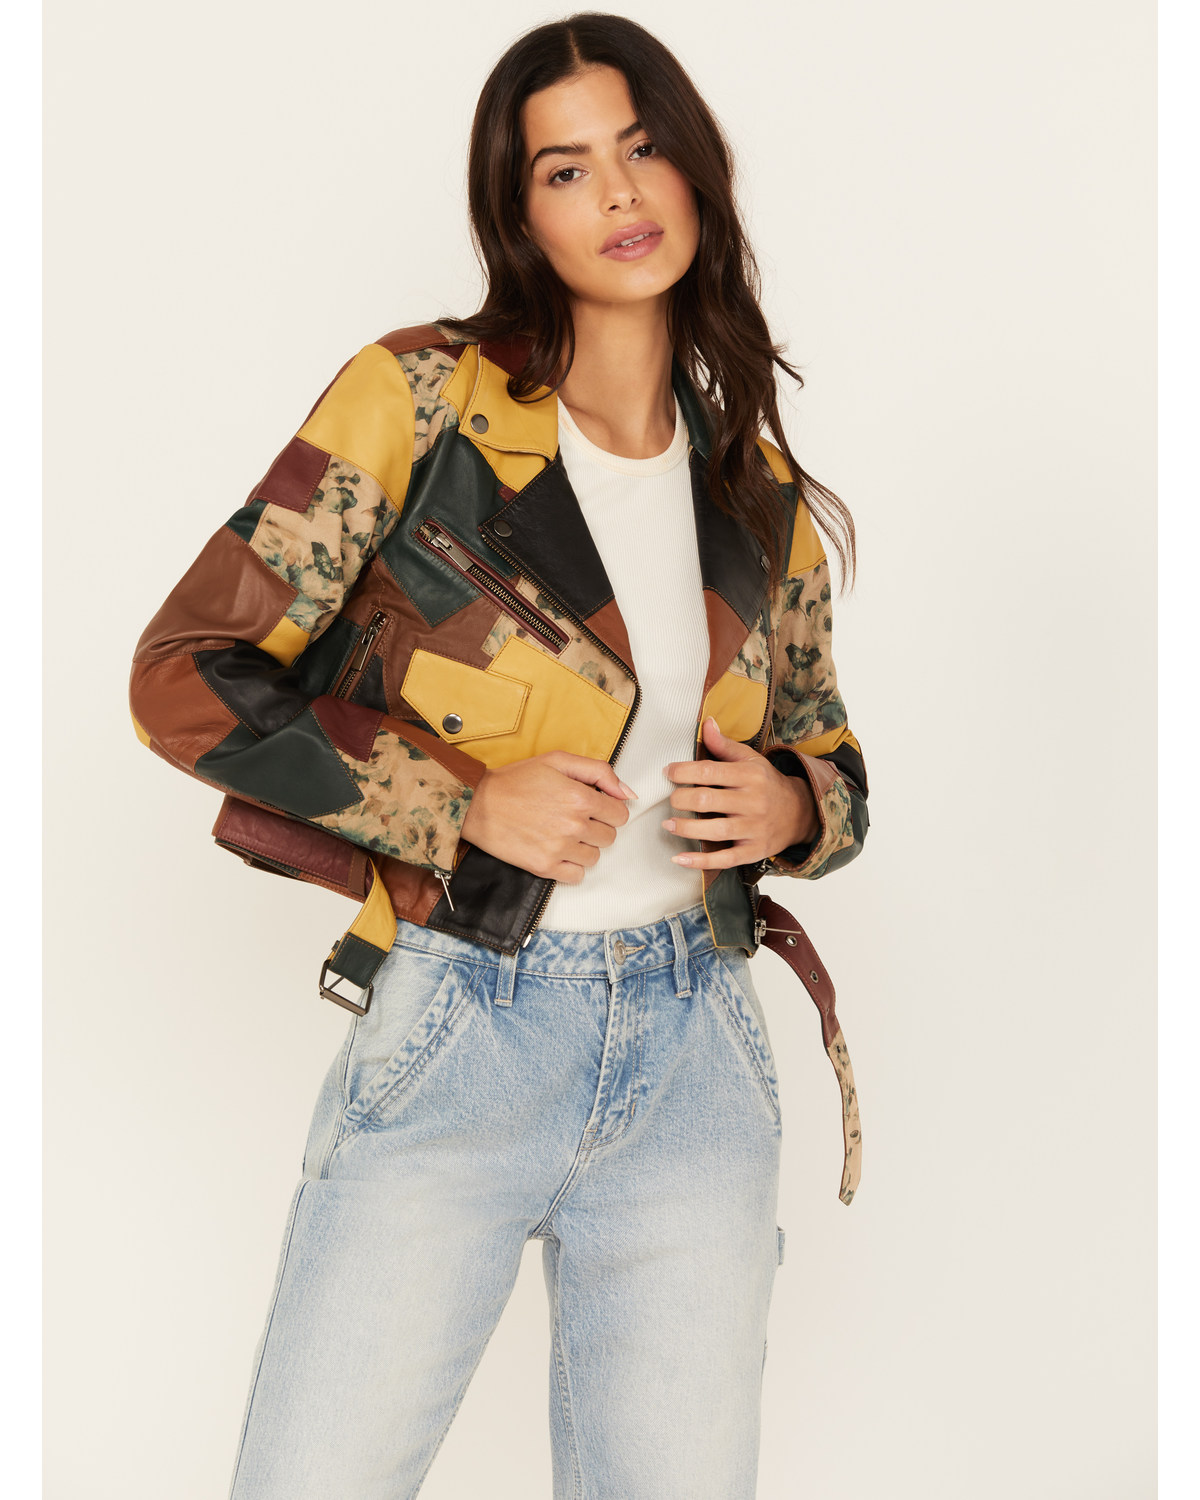 Cleo + Wolf Women's Patchwork Leather Jacket